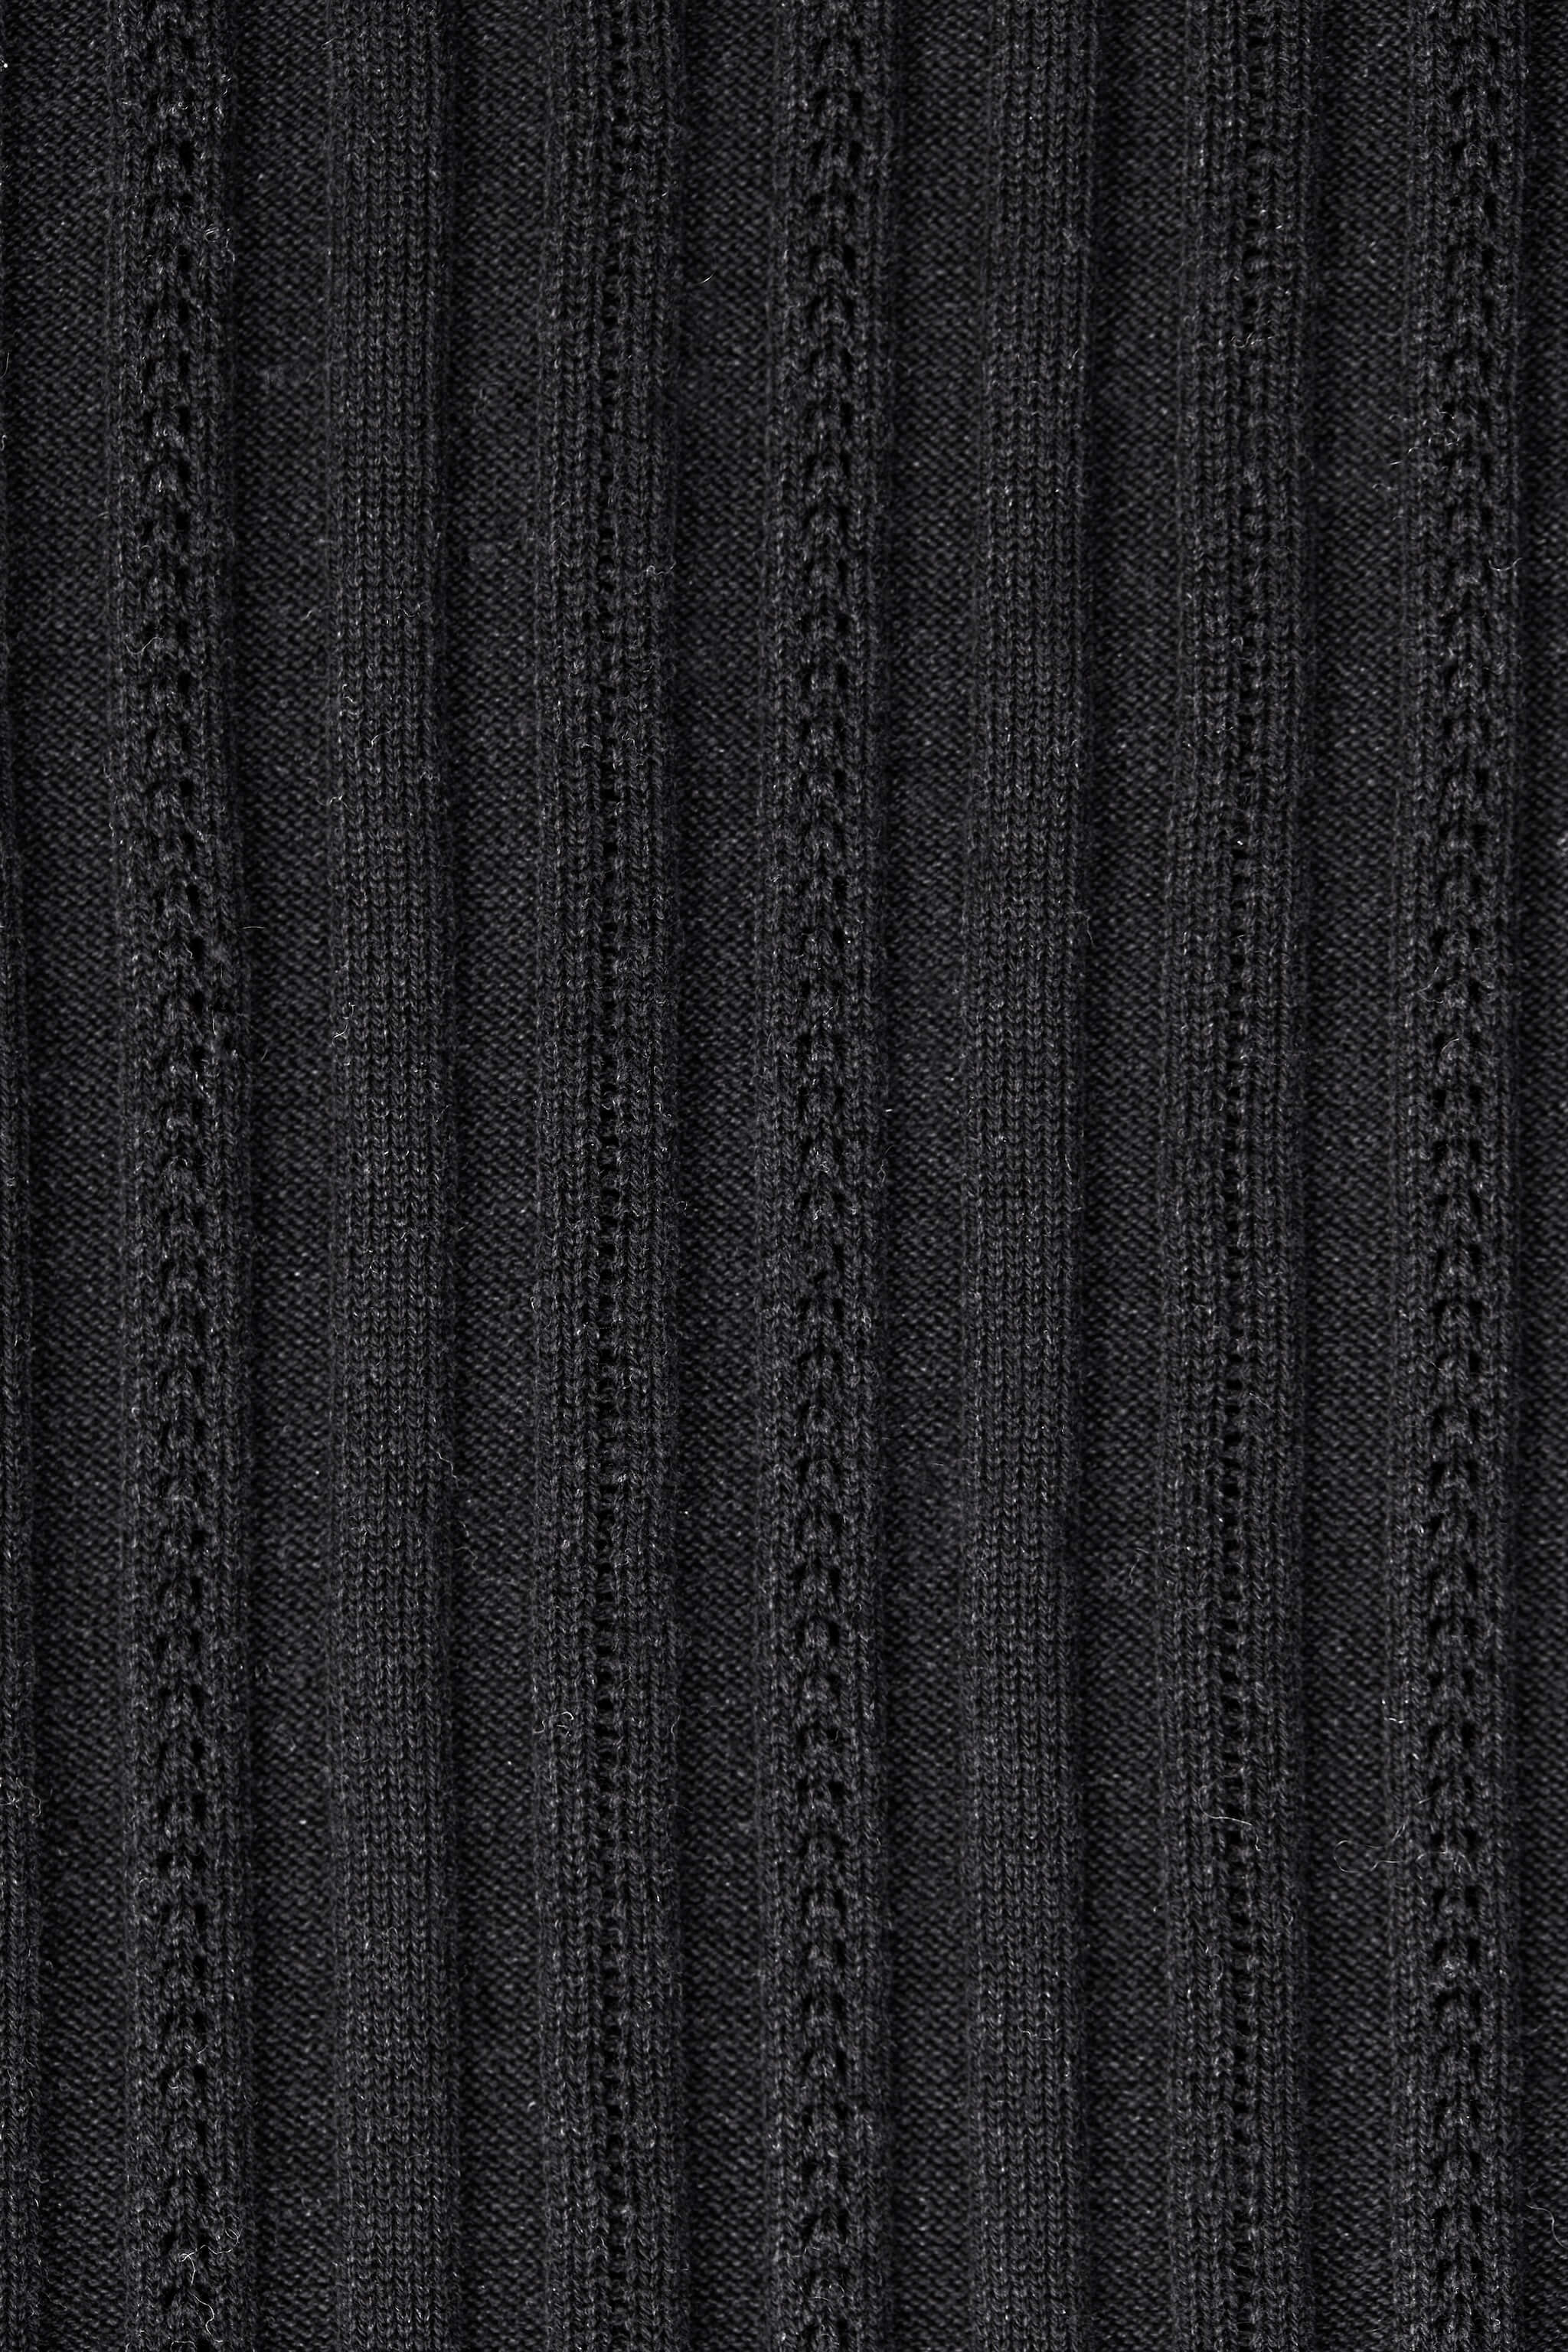 Texture detail of Cyme Copenhagen's sustainable black knit fabric, showcasing the quality and intricate patterns that exemplify the brand's commitment to top fashion and Danish designer craftsmanship in women's clothing.